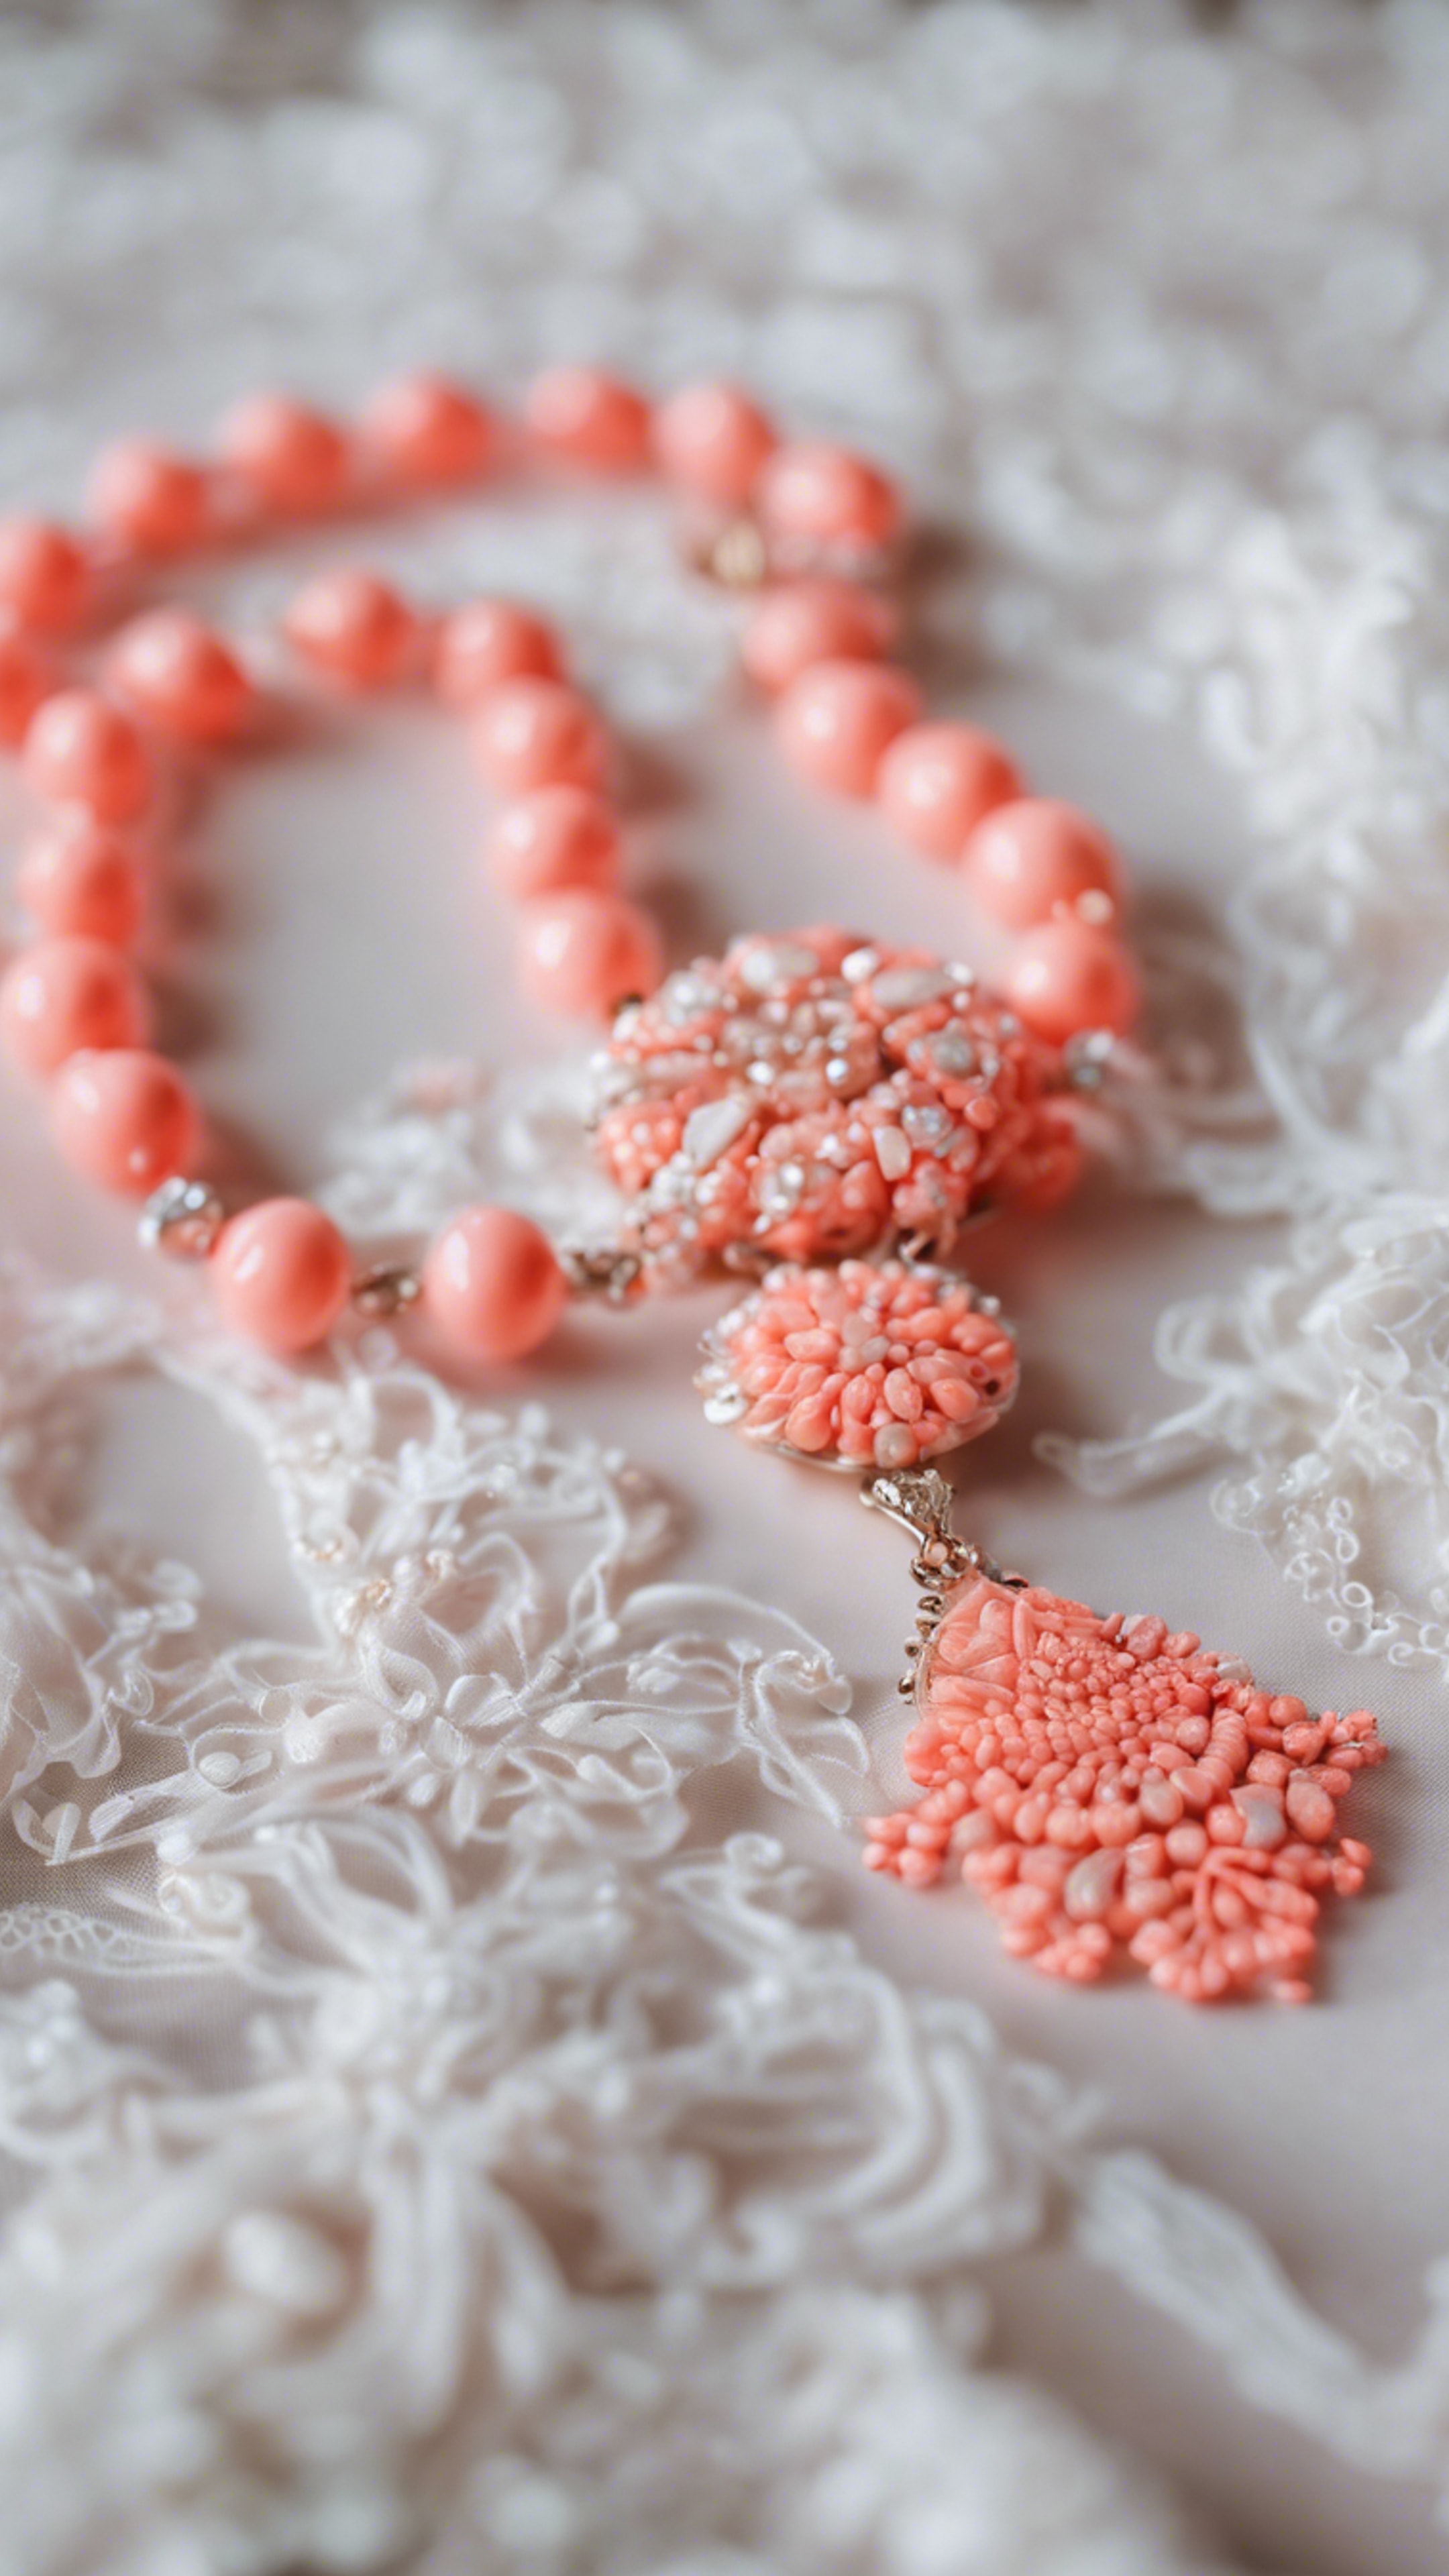 A preppy neon coral necklace against a white lace dress. ផ្ទាំង​រូបភាព[7558fb99fbaf41faa5f9]